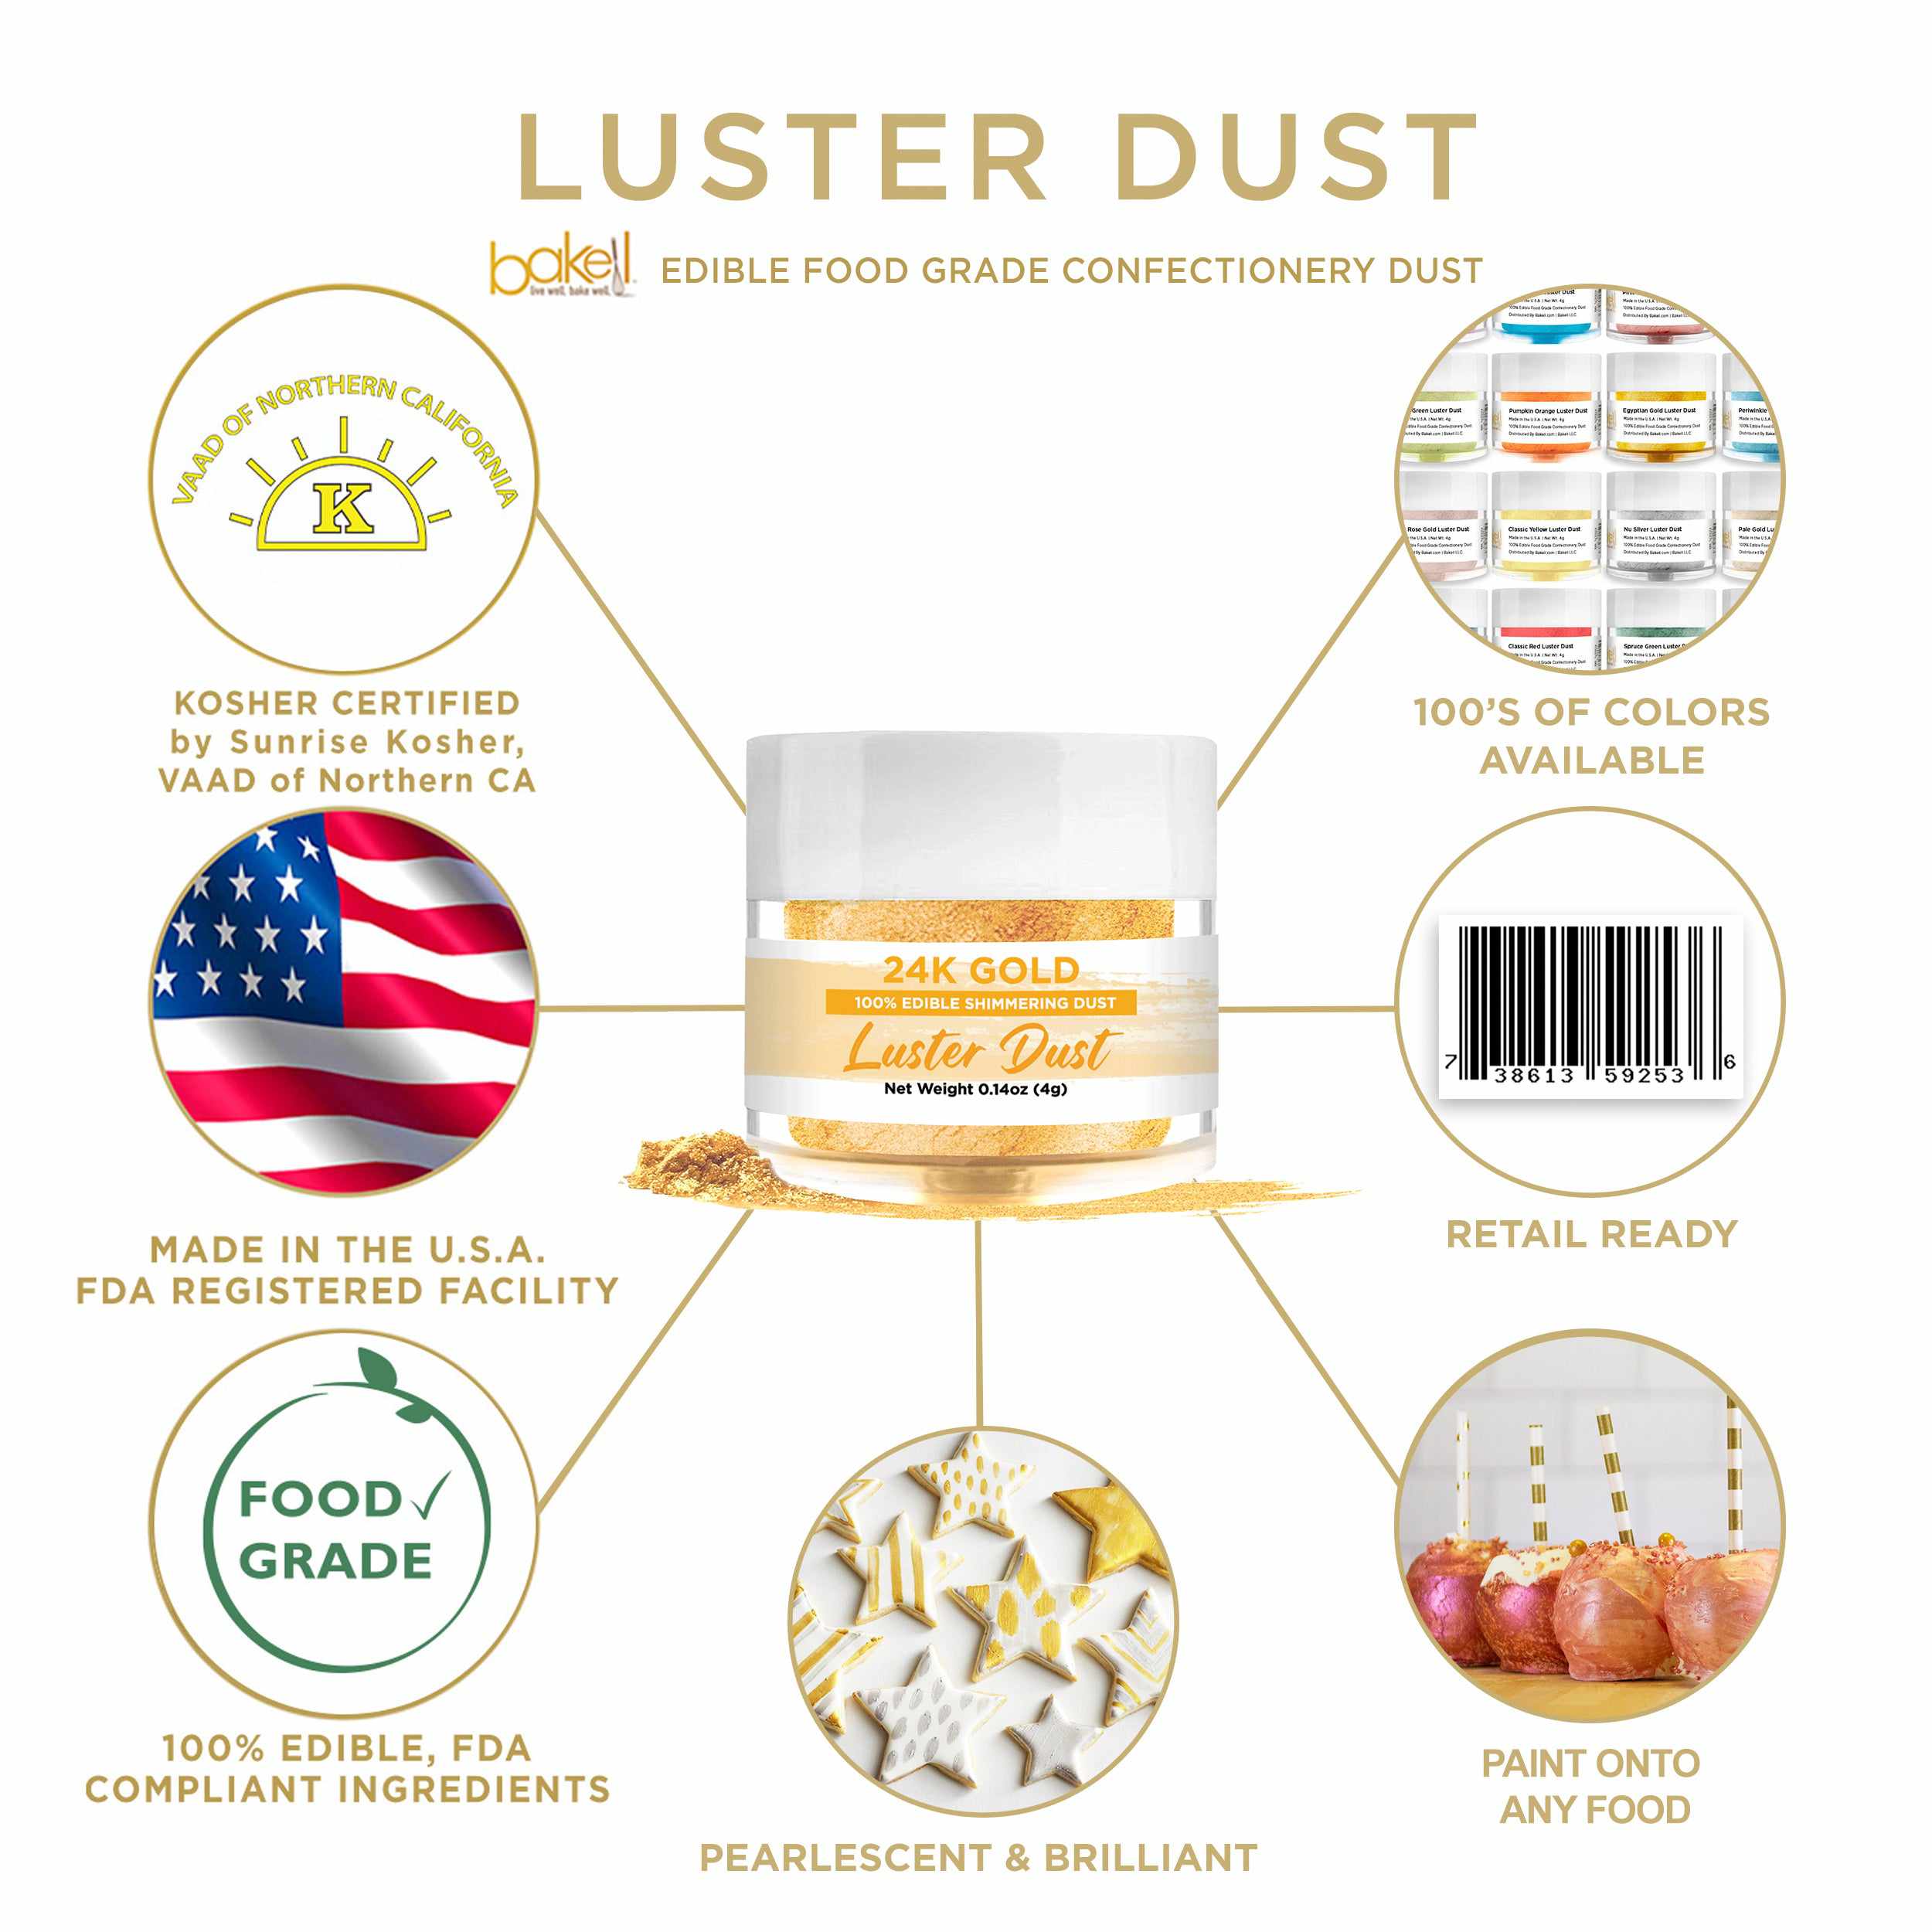 24K Gold Luster Dust Metallic Baking Dust and Shimmering Edible Paint 4g Jar Information